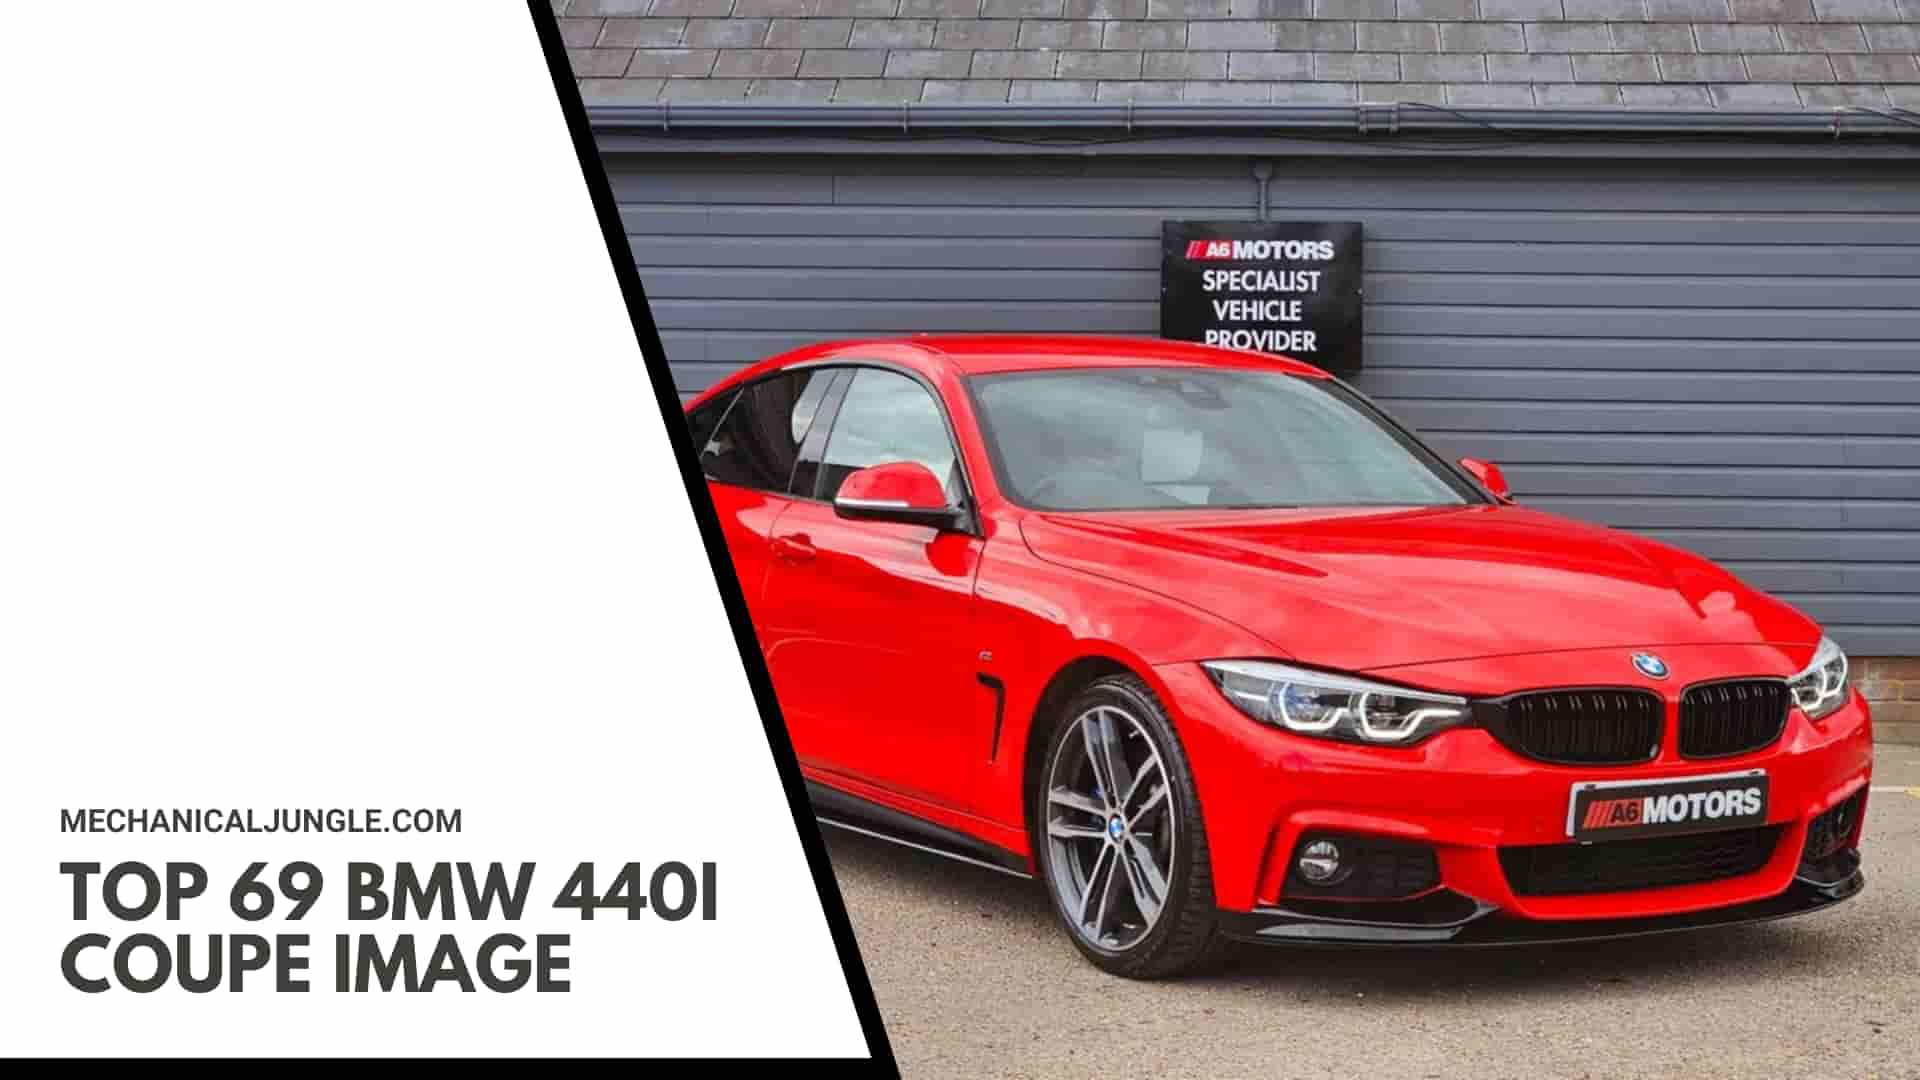 Top 69 BMW 440i Coupe Image